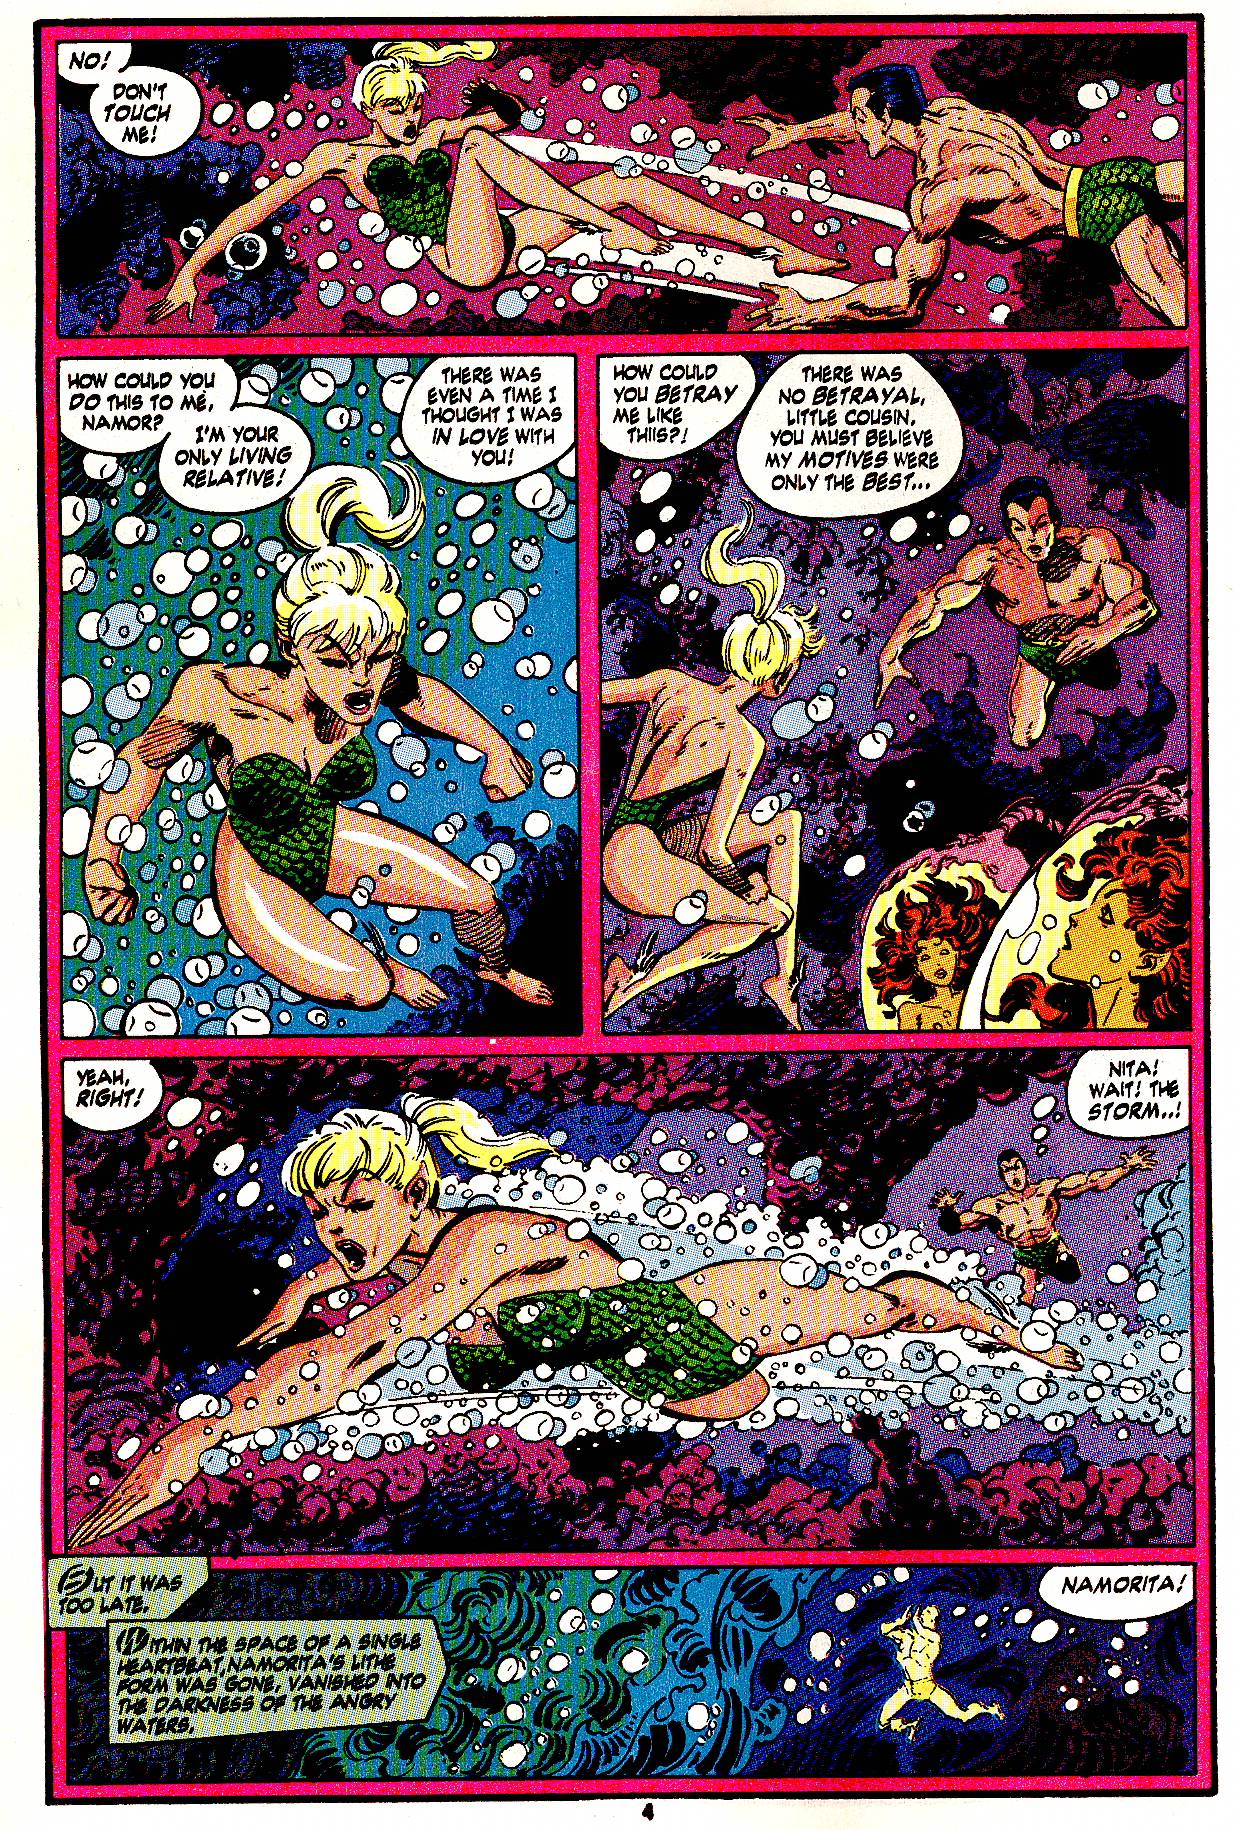 Read online Namor, The Sub-Mariner comic -  Issue #20 - 5